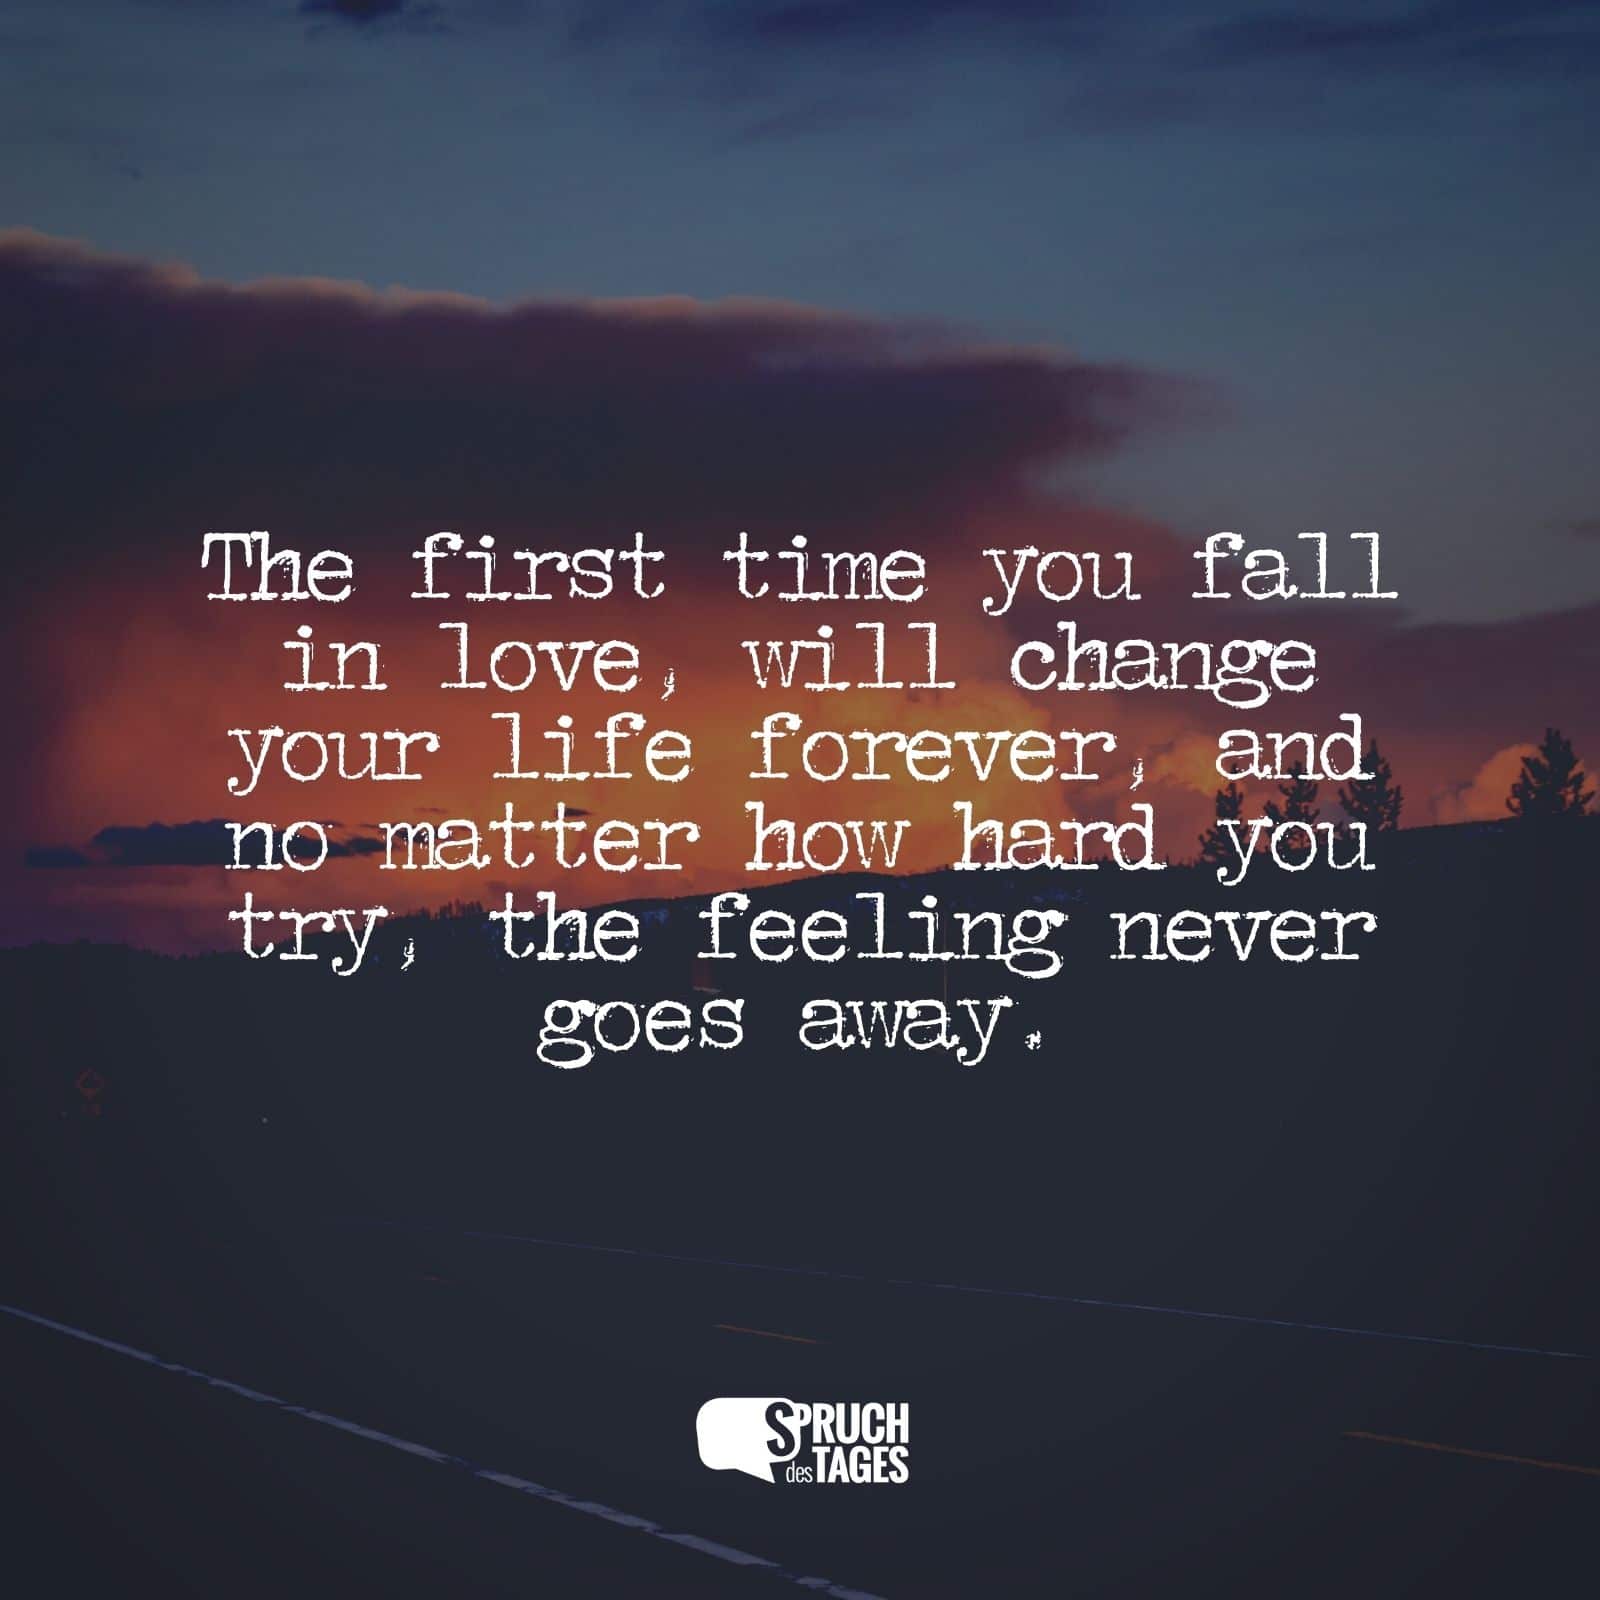 The first time you fall in love, will change your life forever, and no matter how hard you try, the feeling never goes away.